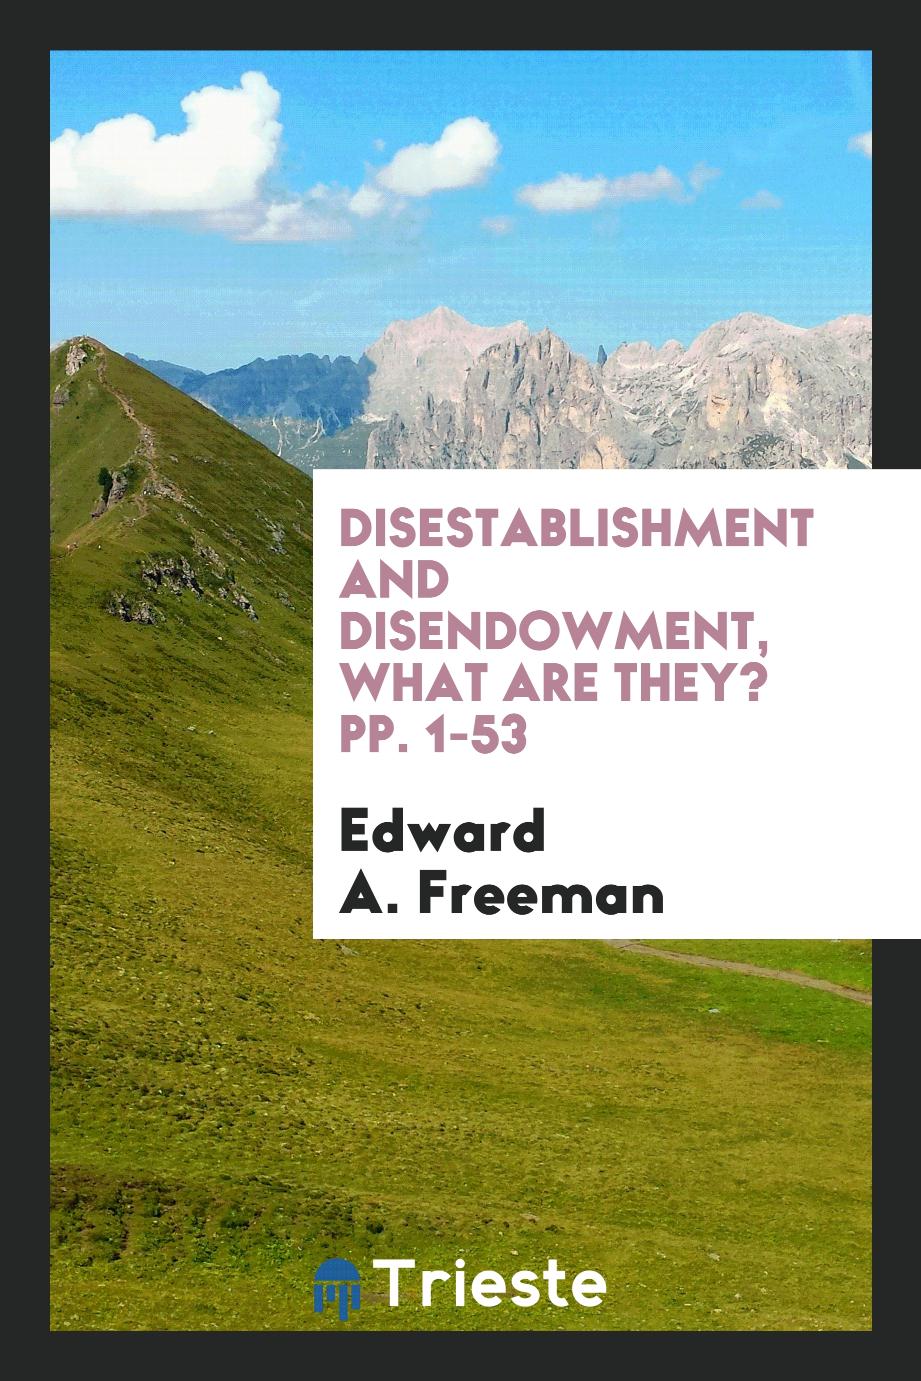 Disestablishment and Disendowment, what are They? pp. 1-53